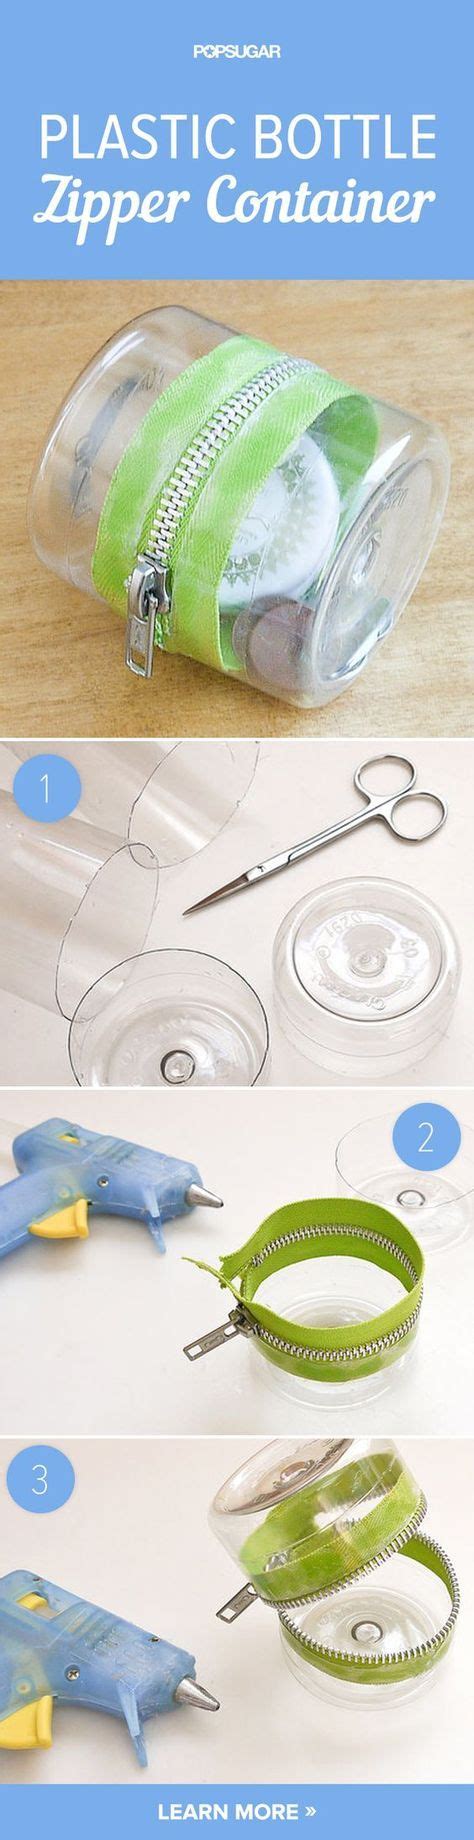 34 Creative Ways To Recycle Plastic Bottles Into Useful Things